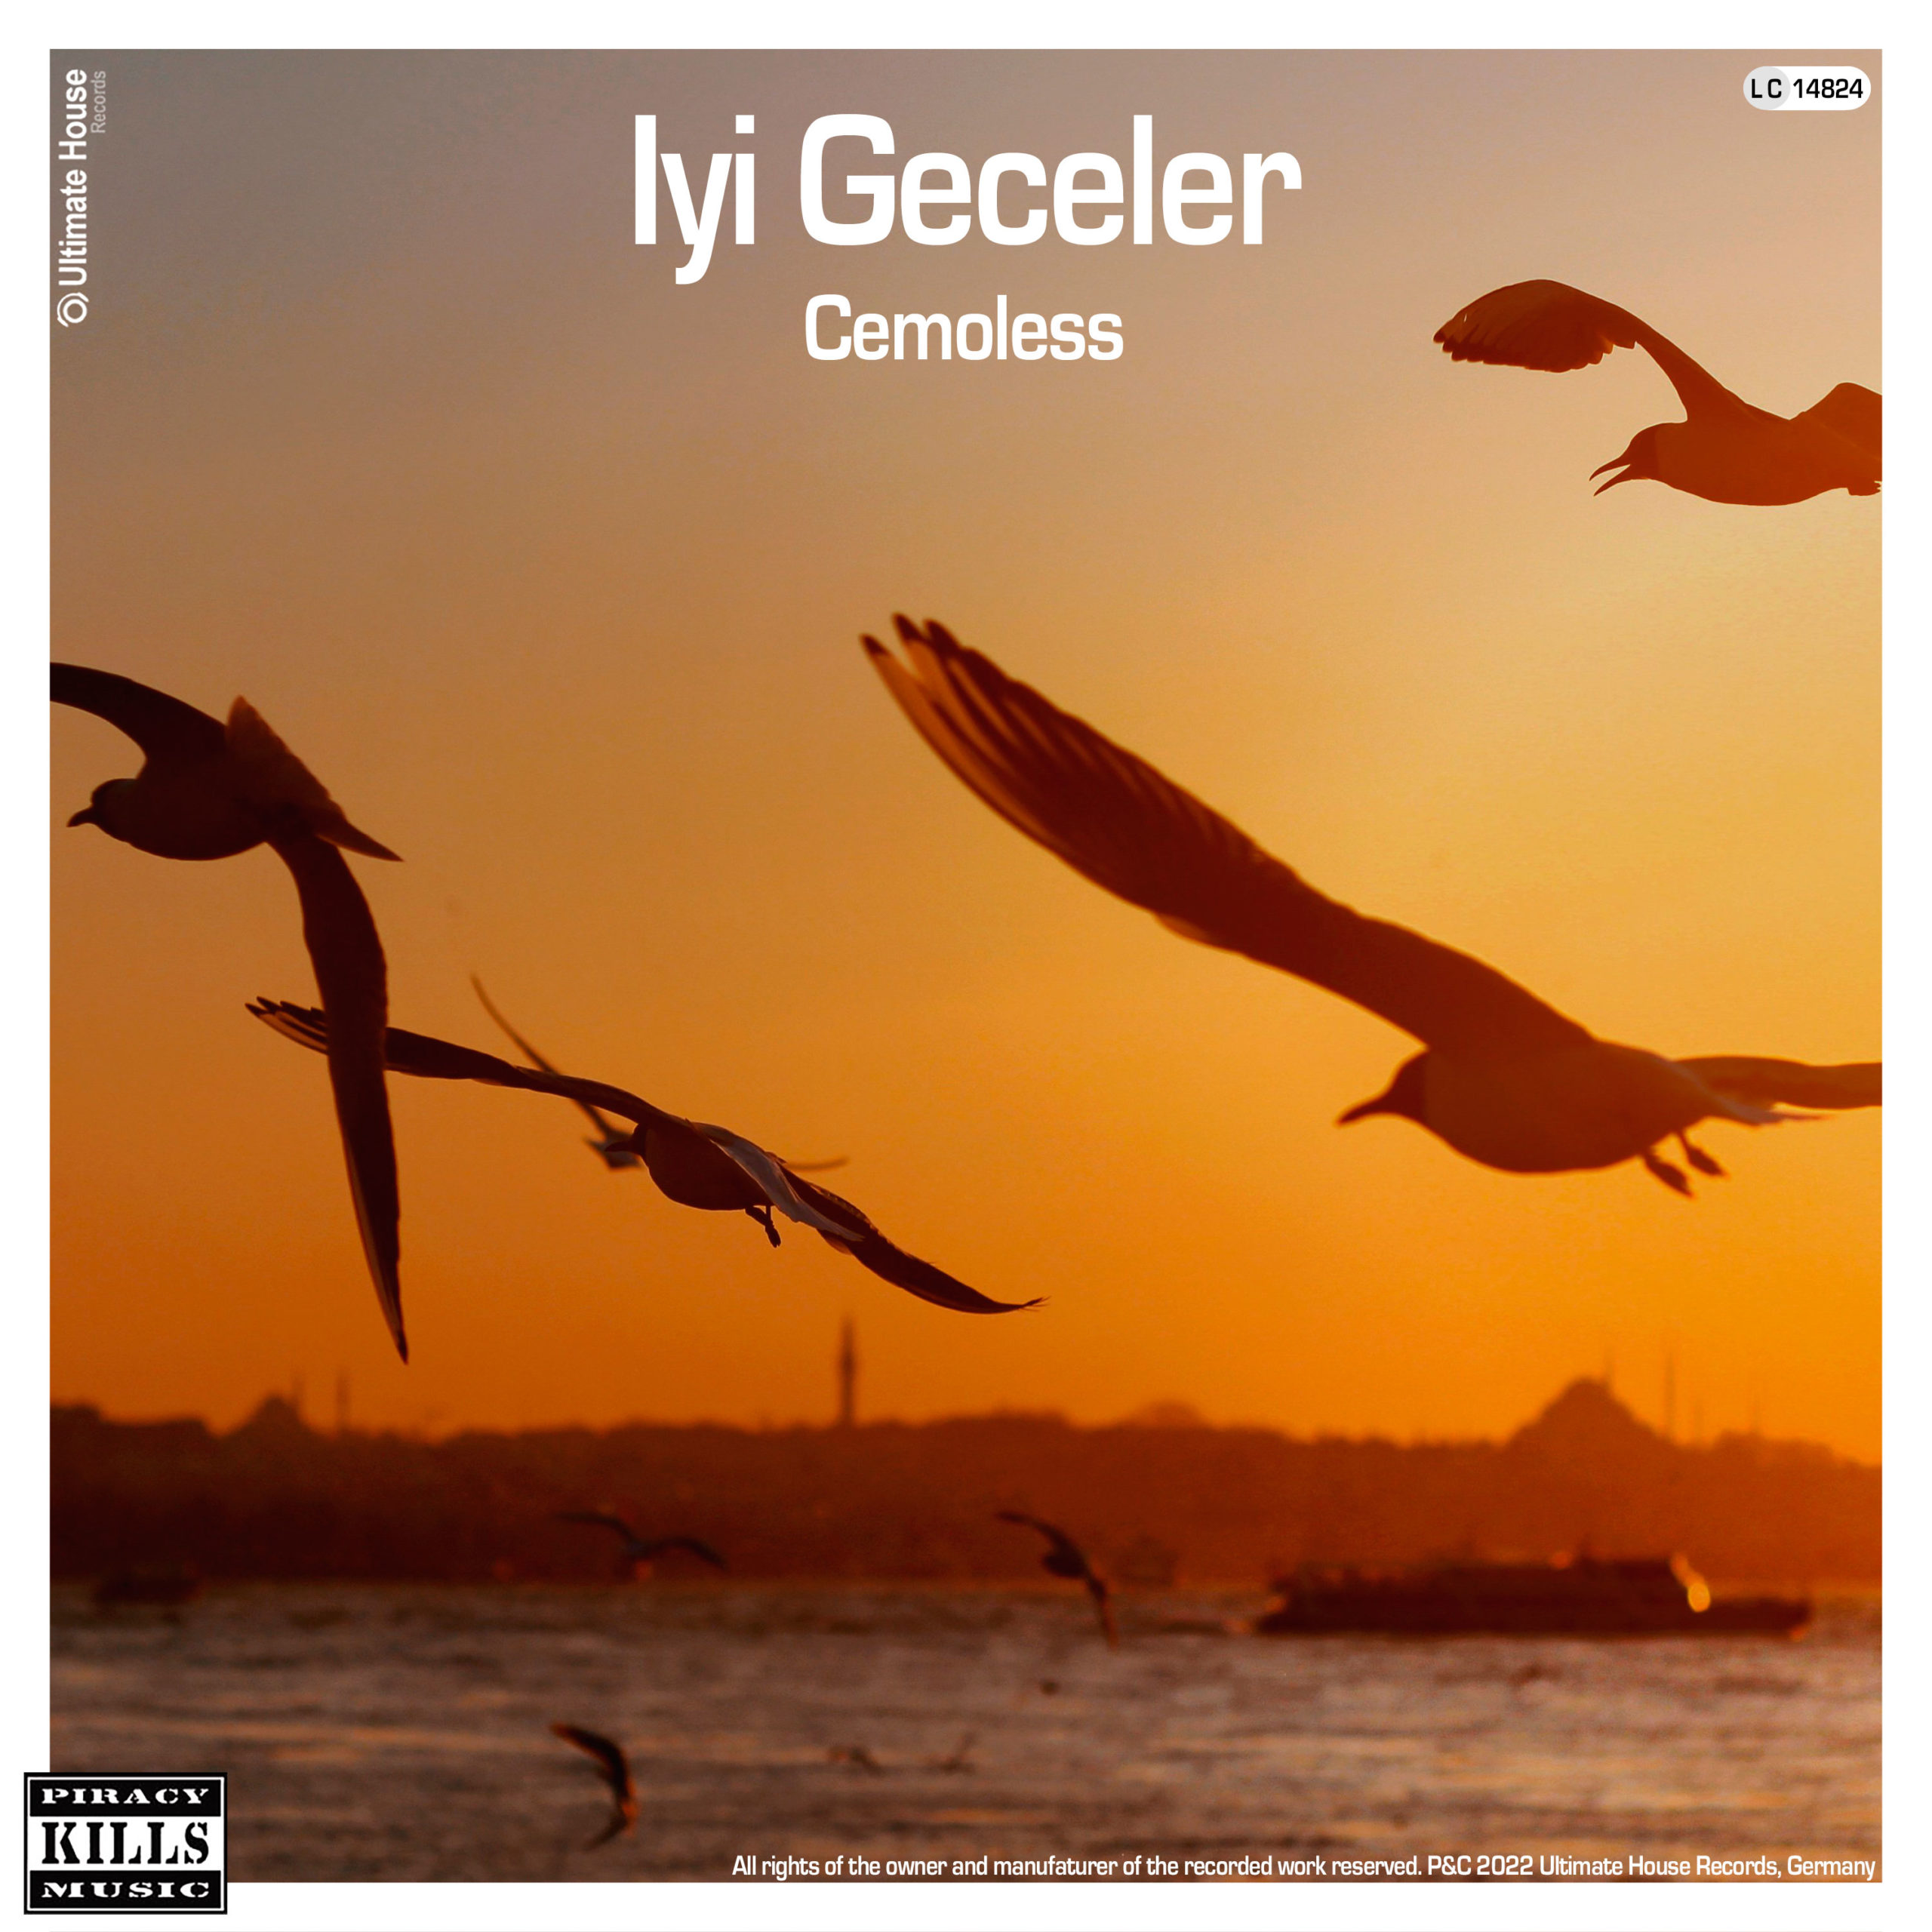 https://www.ultimate-house-records.com/wp-content/uploads/2022/05/160-Cemoless-Iyi_Geceler-Cover_3000px_web-scaled.jpg